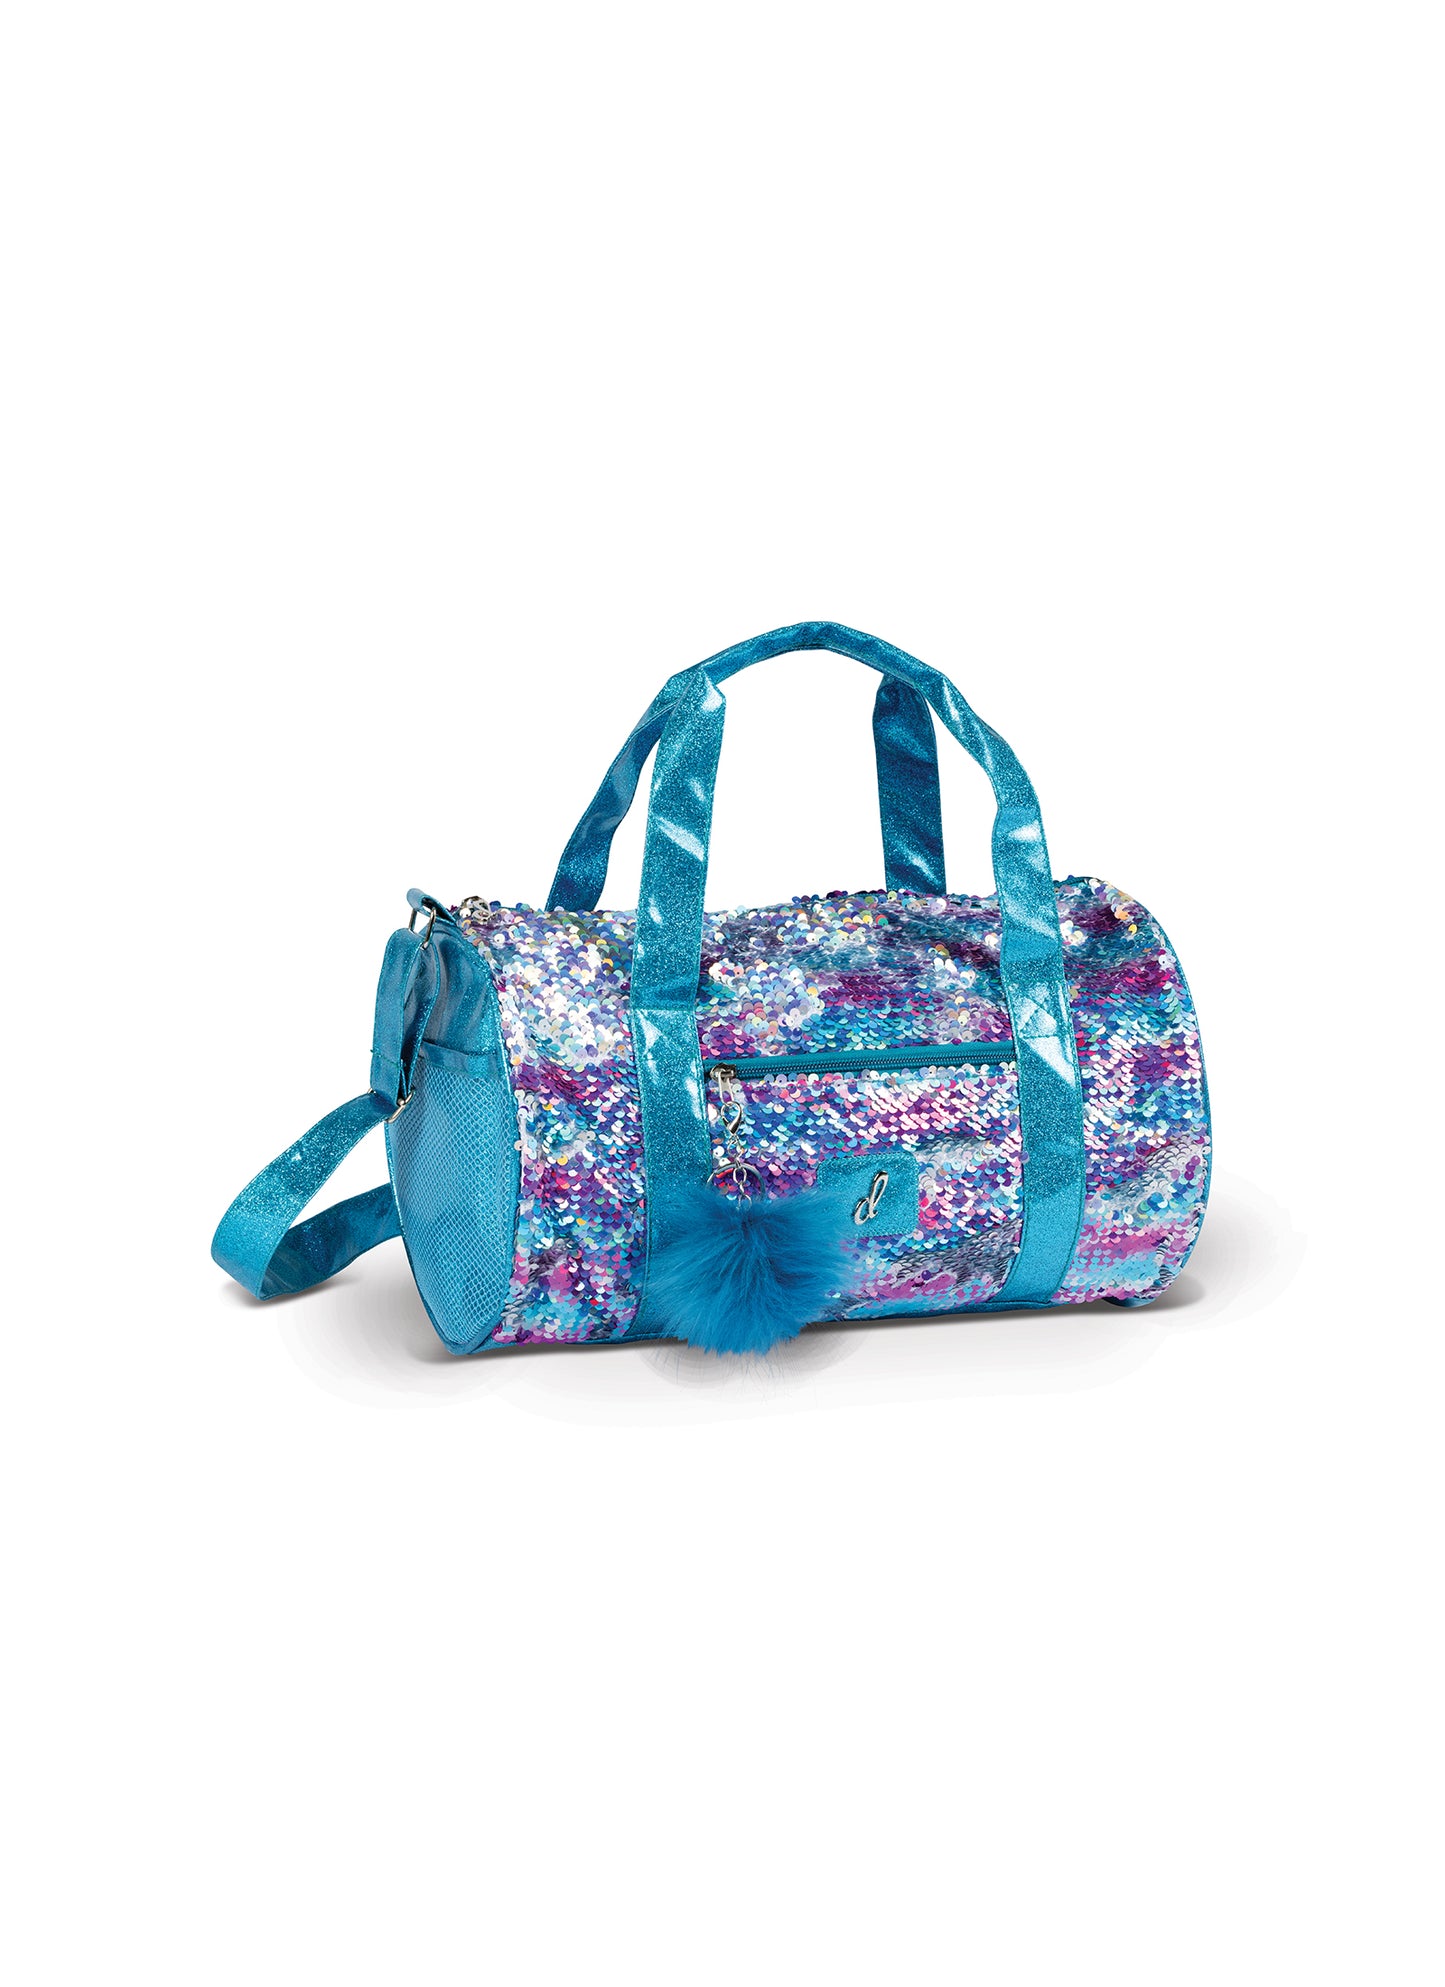 Turquoise Sparkly Sequin Duffle Bag